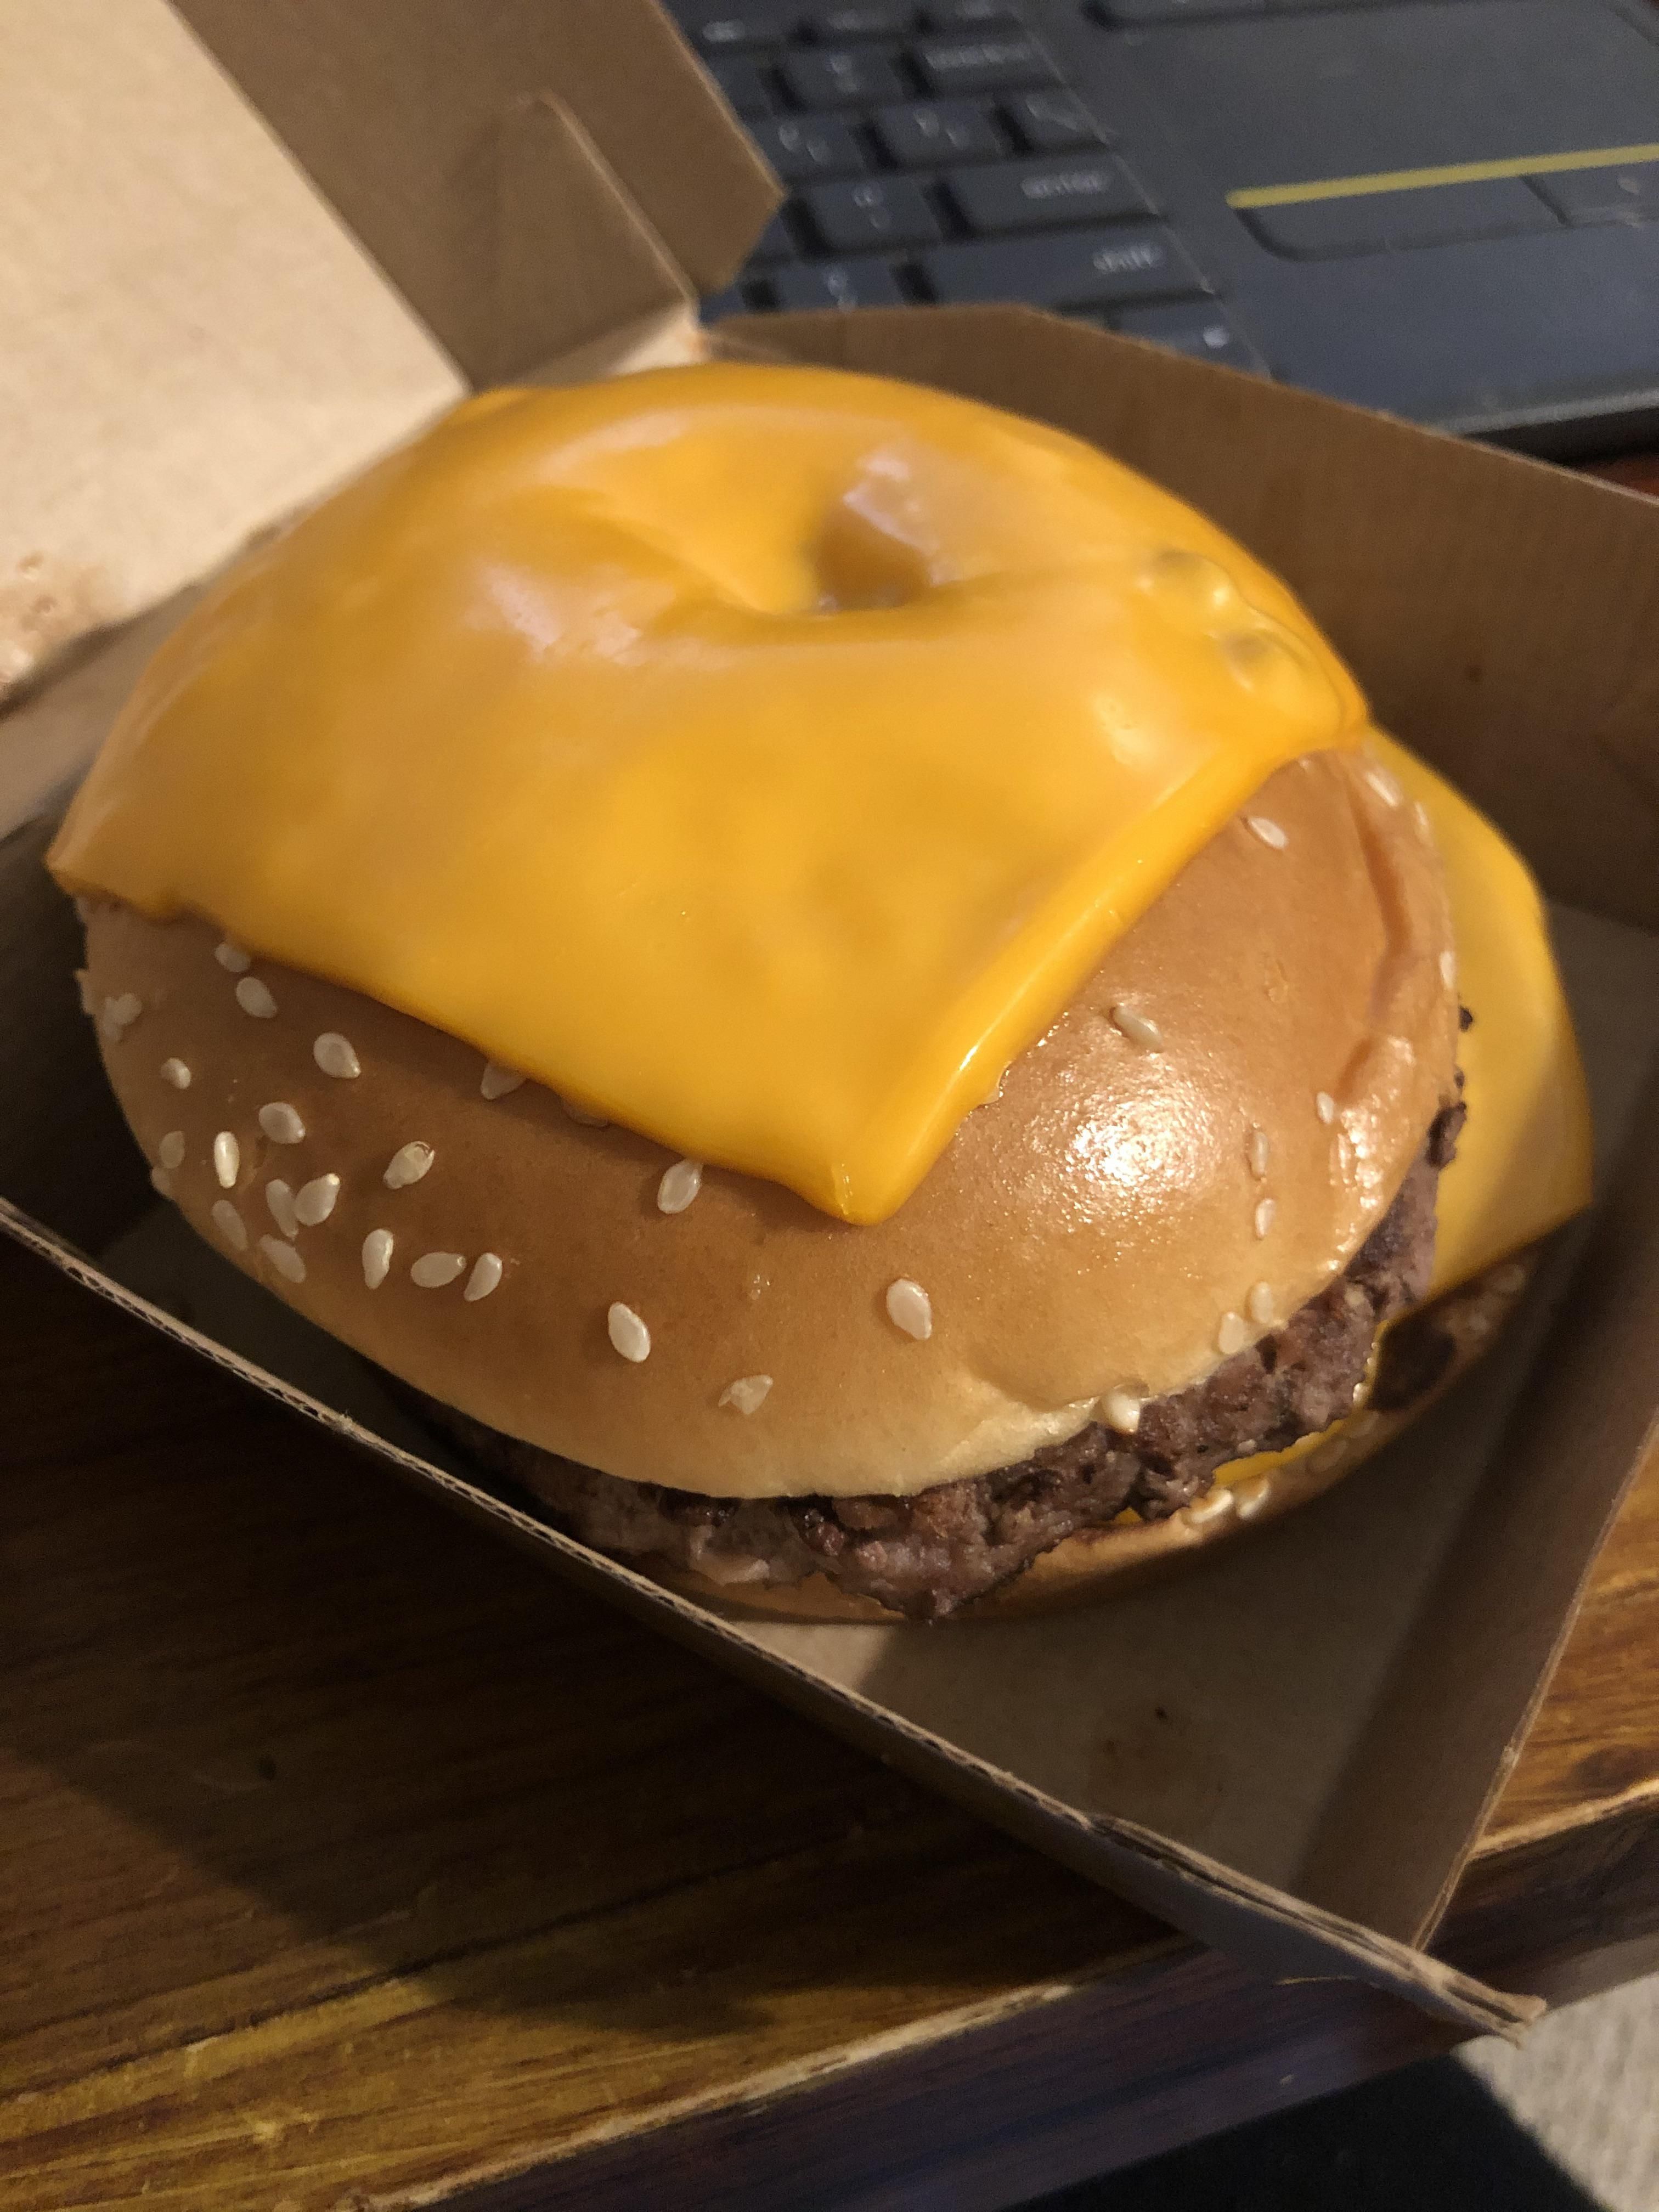 Asked for extra cheese on the burger. Clearly someone’s first day.